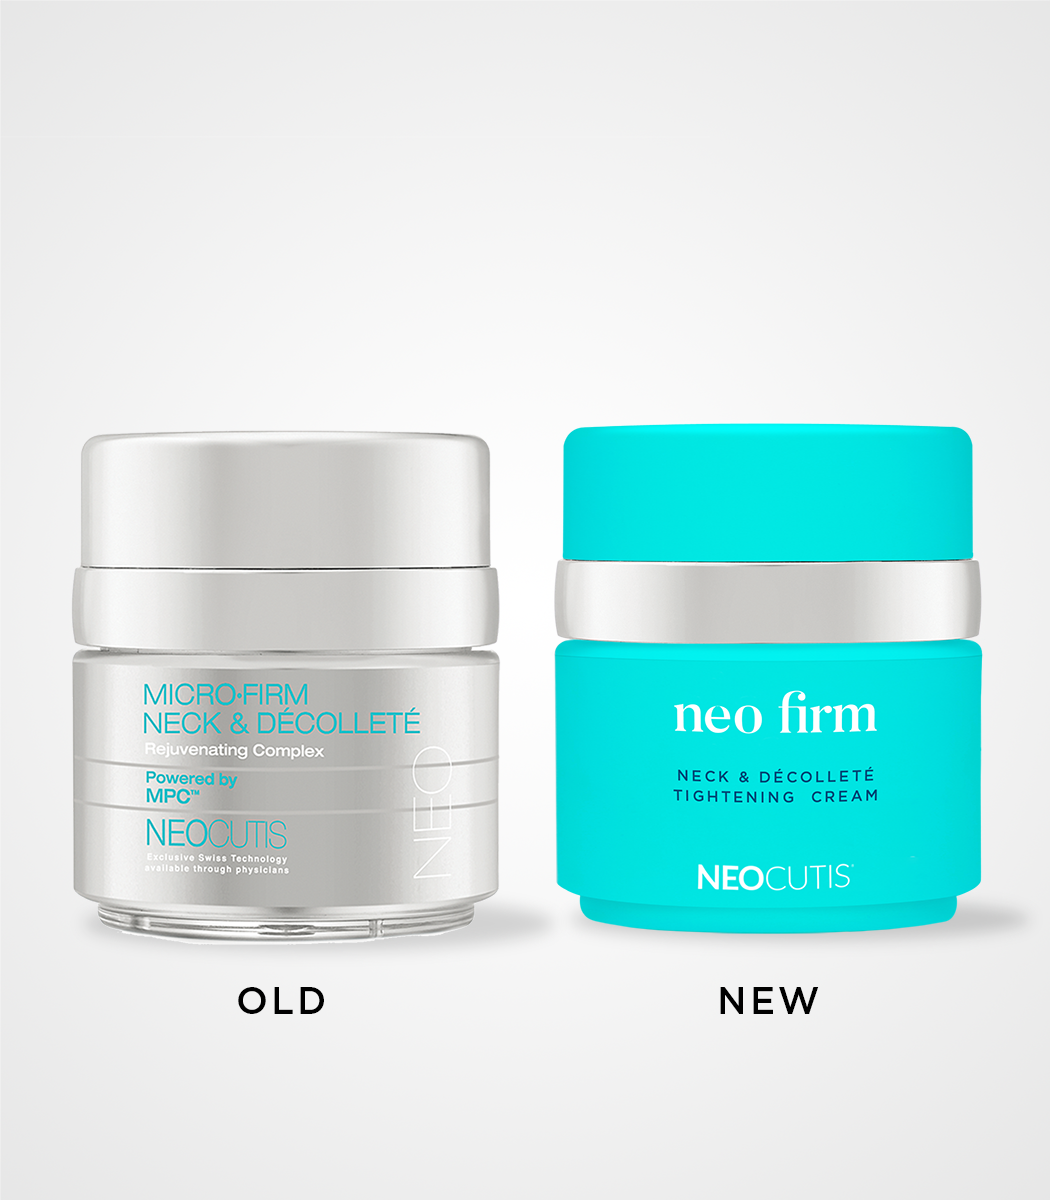 NEOCUTIS Neo Firm | Neck & Tightening Cream | 2 Month Supply |Restores elastin & collagen to firm and tighten skin plus diminish the appearance of age spots and uneven skin tone | Dermatologist Tested | New and Improved